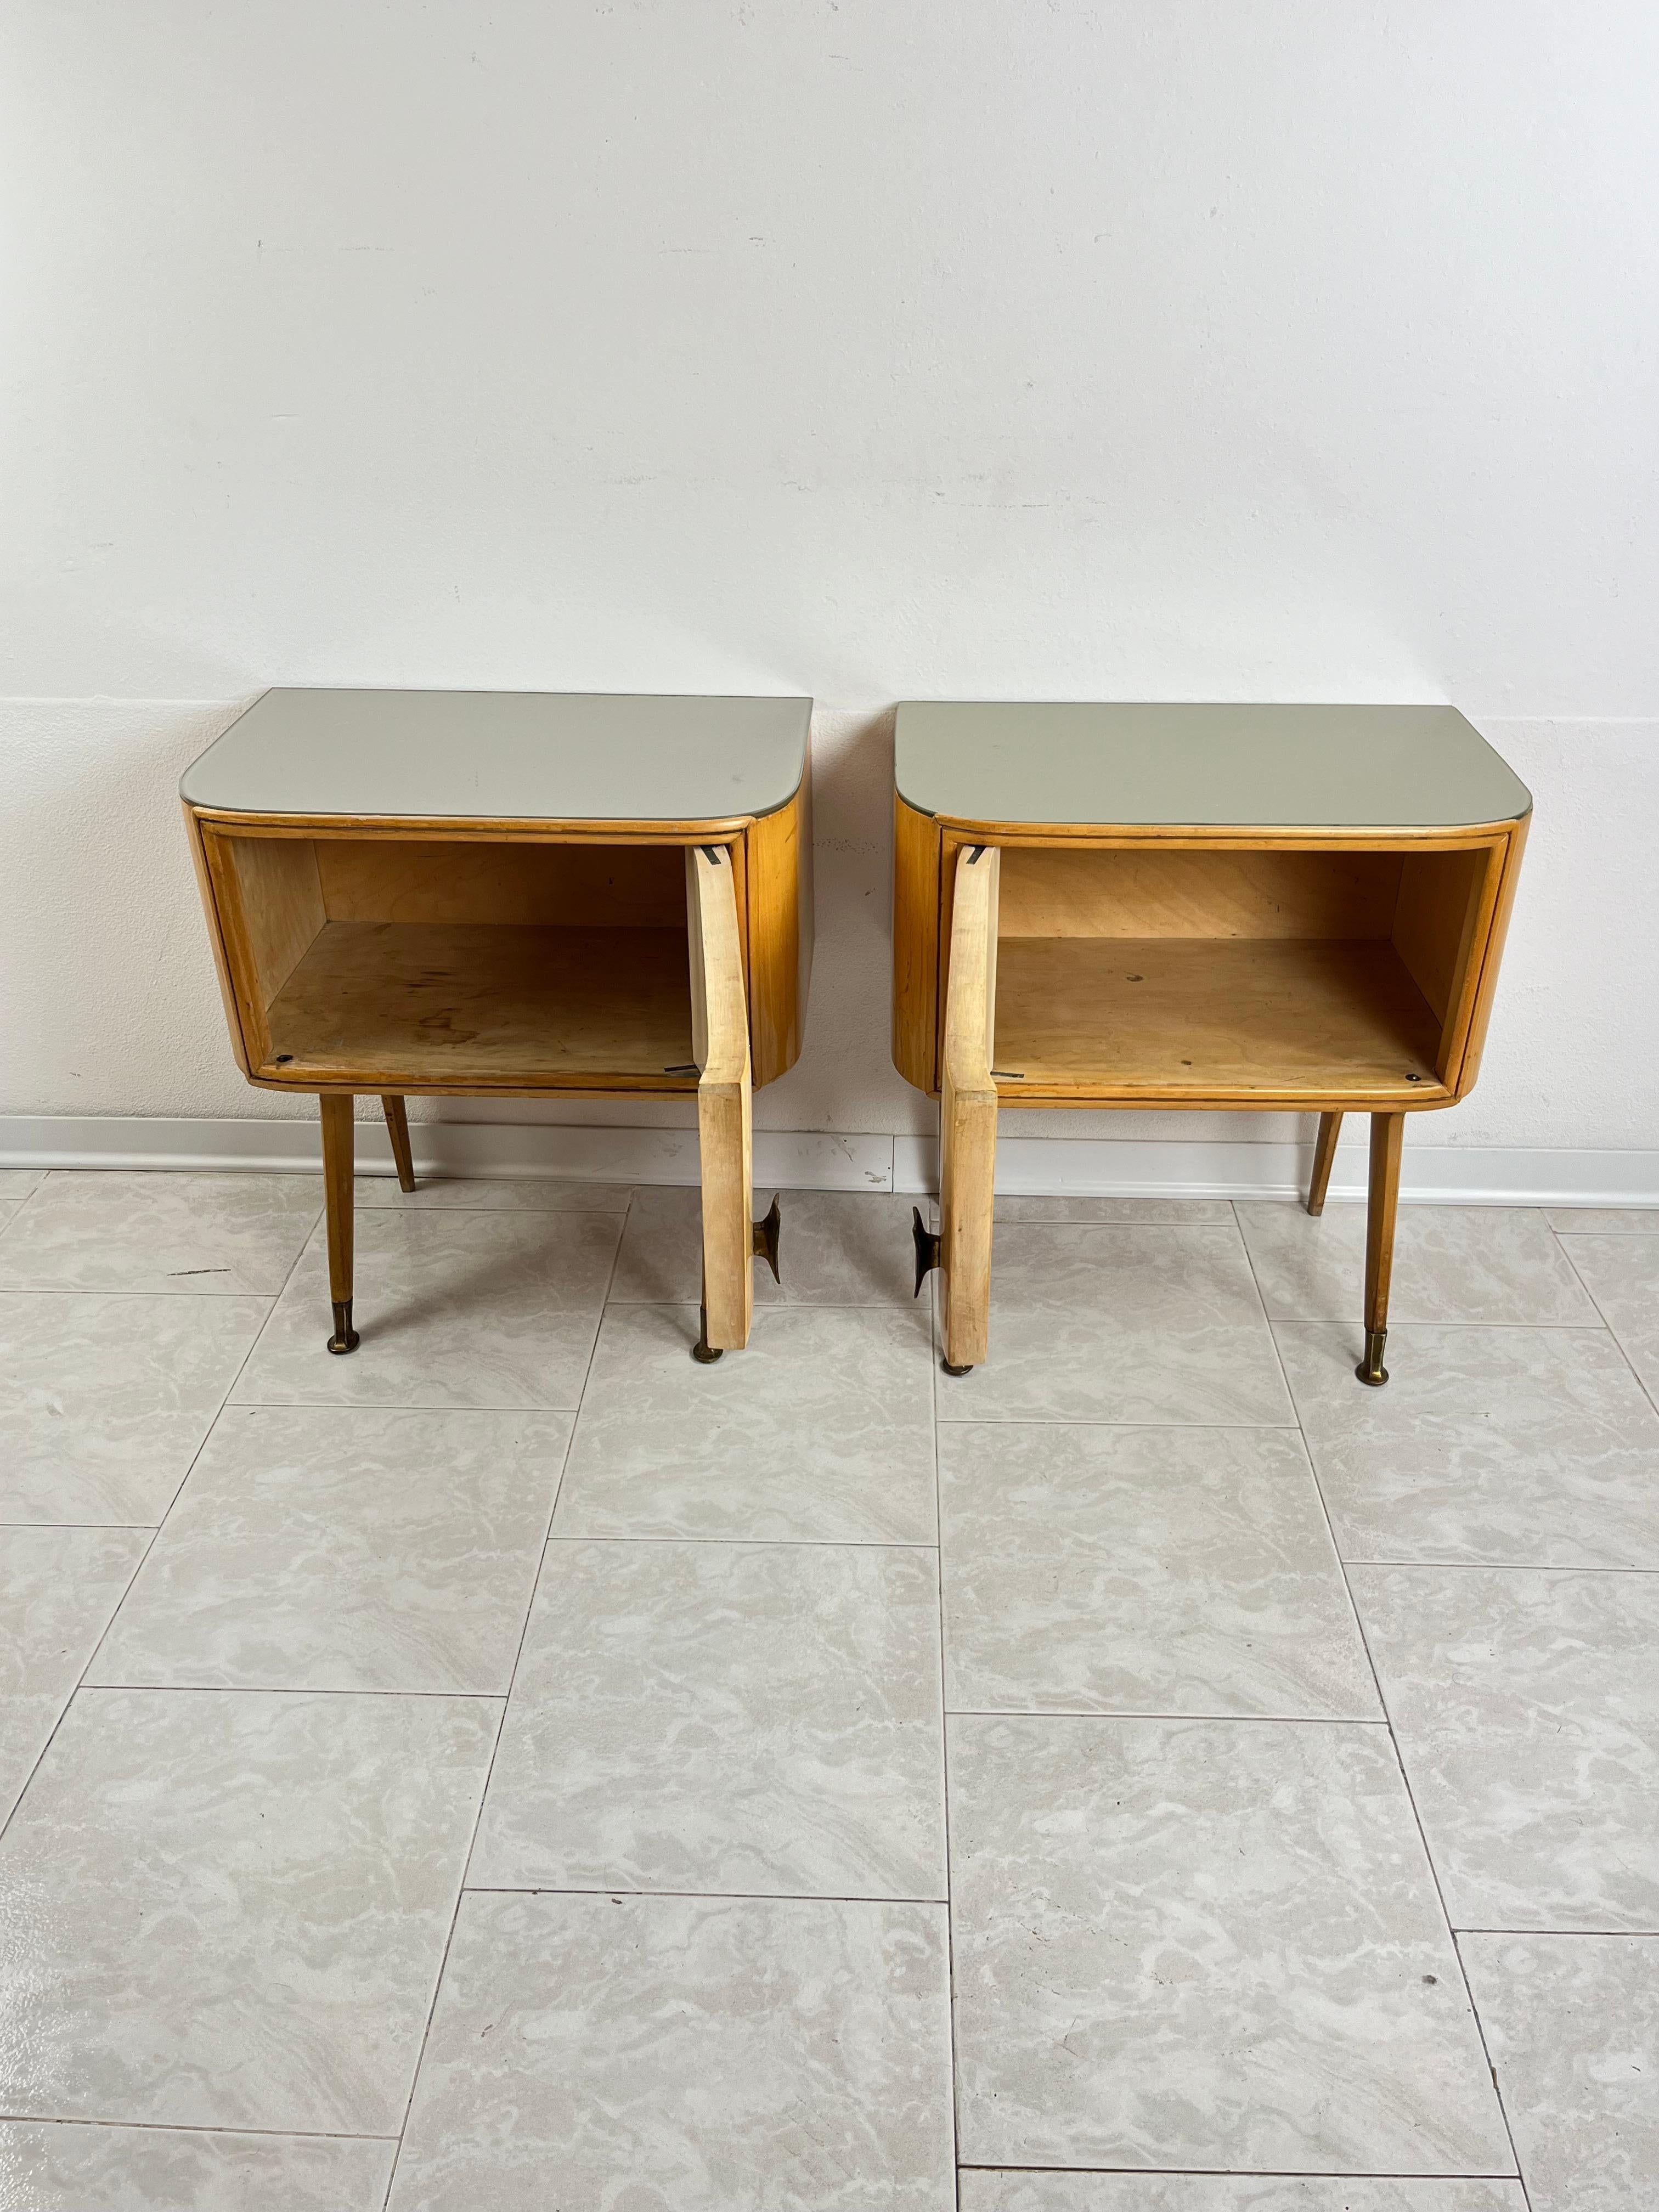 Set Of 2 Mid-Century Bedside Tables Attributed to Vittorio Dassi 1959 For Sale 1